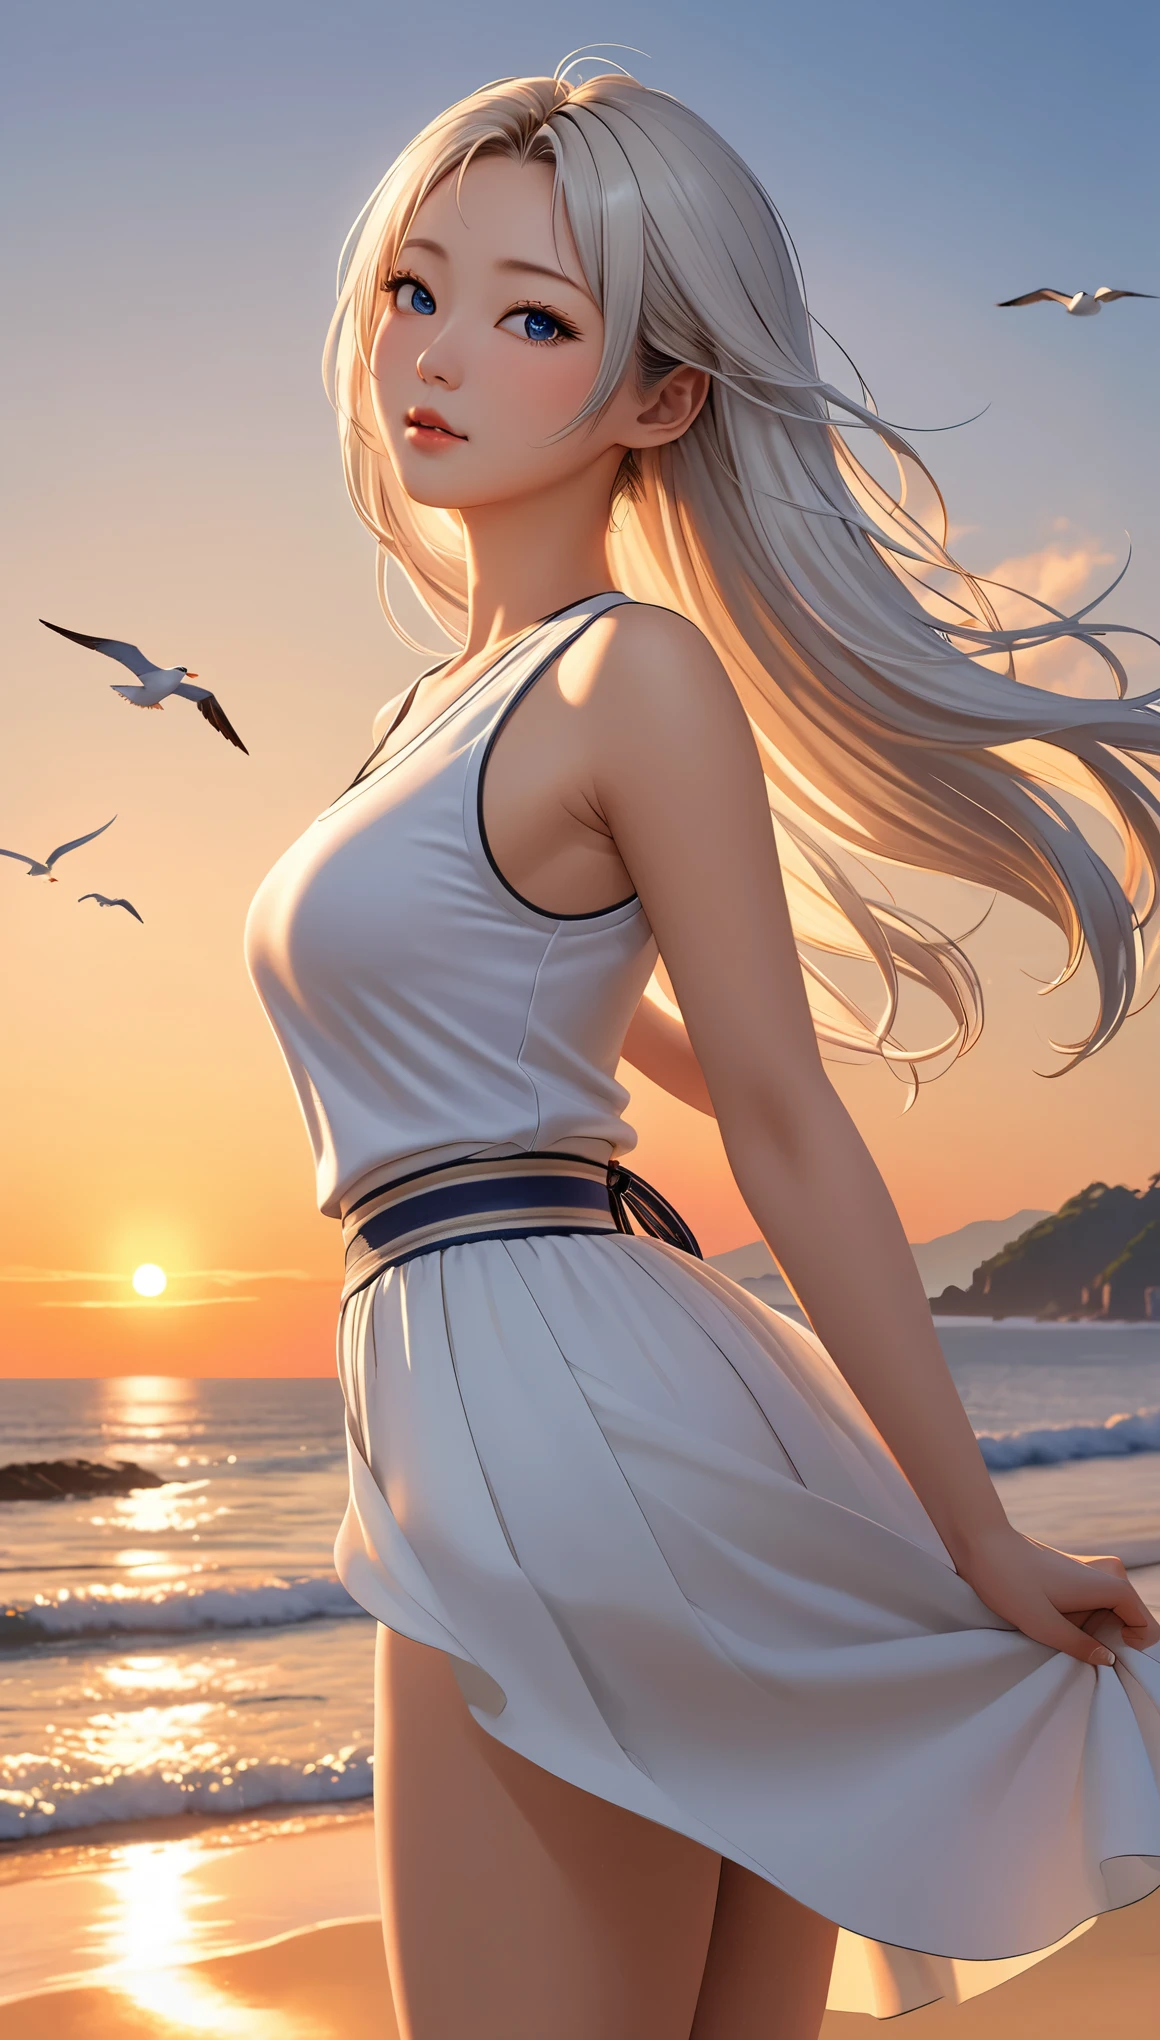 Highest quality, Super quality, 16K, Incredibly absurd, Very detailed, 2.5D, delicate and dynamic, blue sky, Calm sea, Sandy Beach, Sunset, sunset, Enoshima, seabird, Small face, Extremely delicate facial expression, Delicate eye depiction, Extremely detailed hair, Upper body close-up, erotic, sole sexy Japanese lady, healthy shaped body, 22 years old lady, student,  huge firm bouncing busts, white silver long hair, sexy long legs, Glowing Skin, Soft Skin, Sleeveless white T-shirt, brown long skirt, barefoot, Standing backwards, Turn to the camera